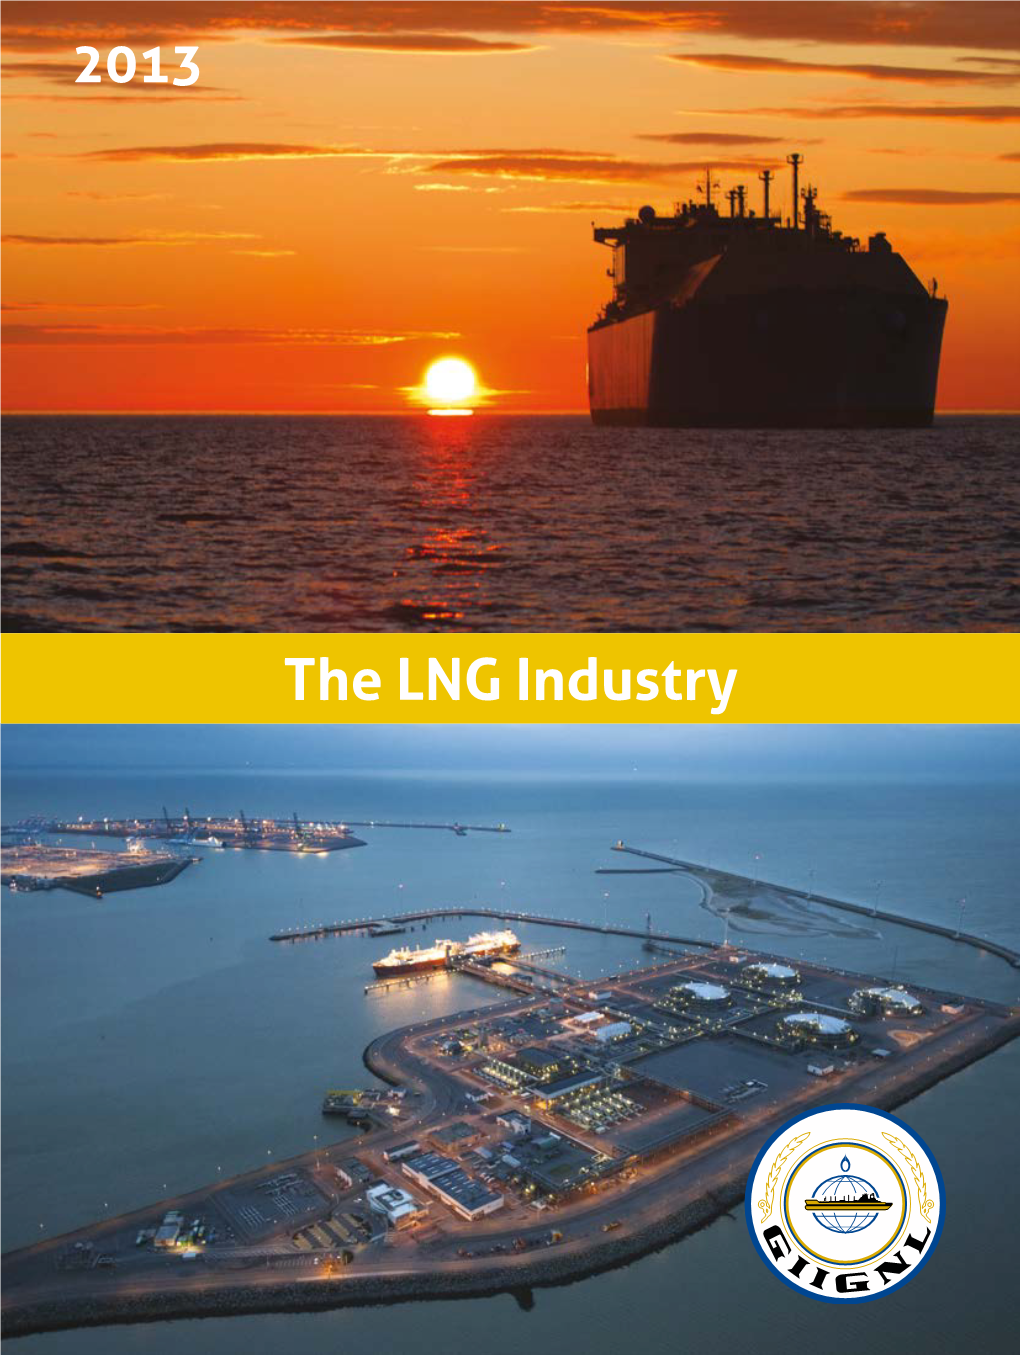 The LNG Industry in 2013 Editorial